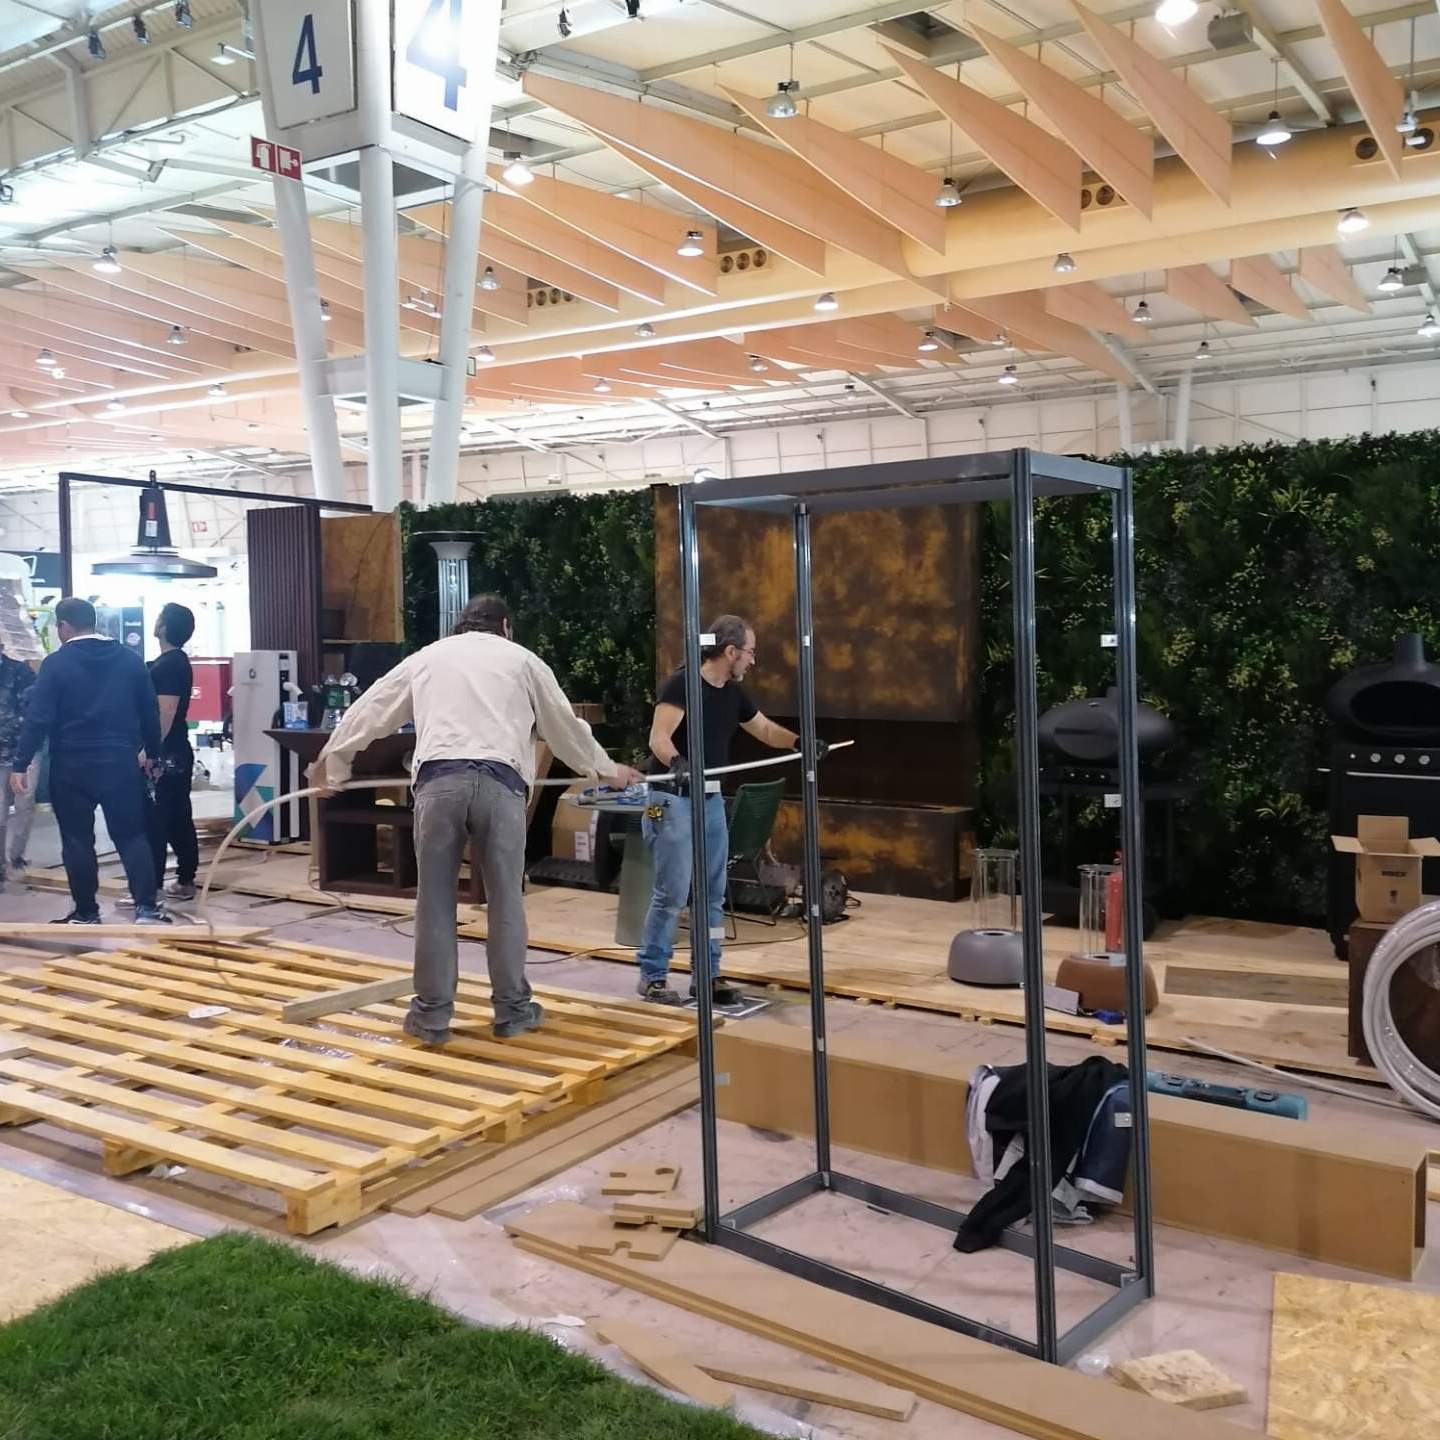 Exhibitors finalize details to start the largest garden and urban space exhibition